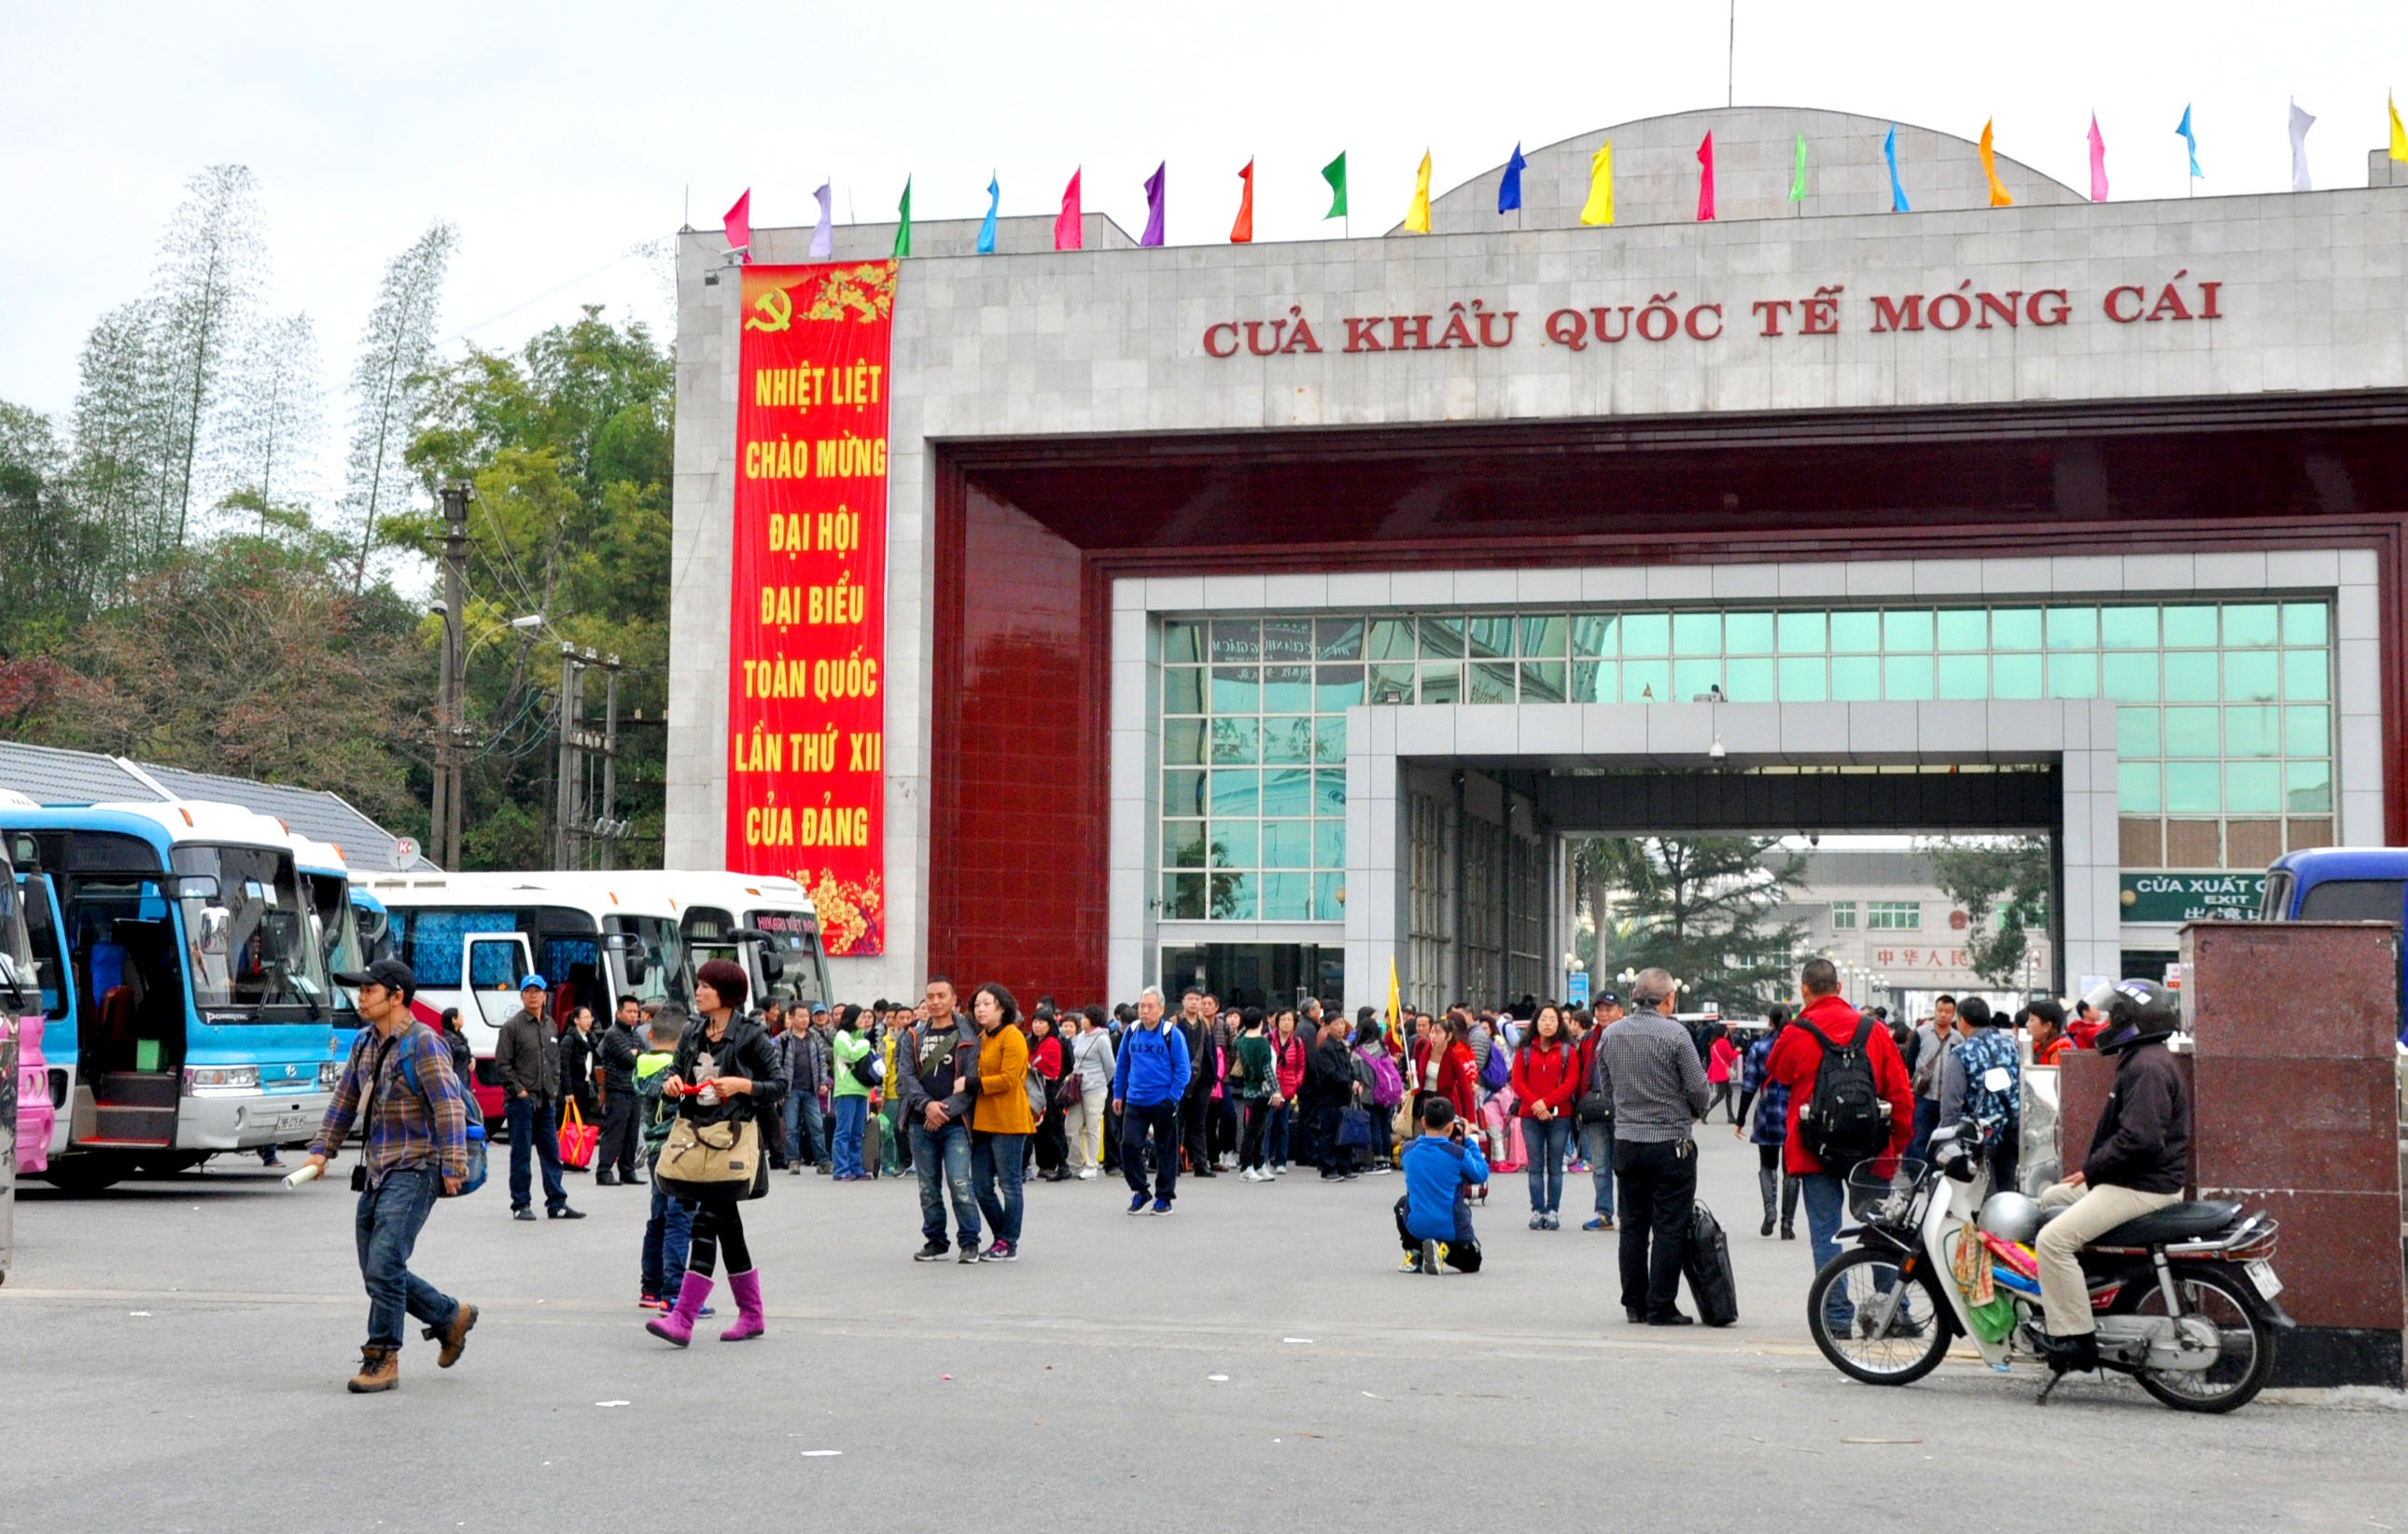 Apply Vietnam E-visa For Crossing The Border From China To Vietnam By Bus